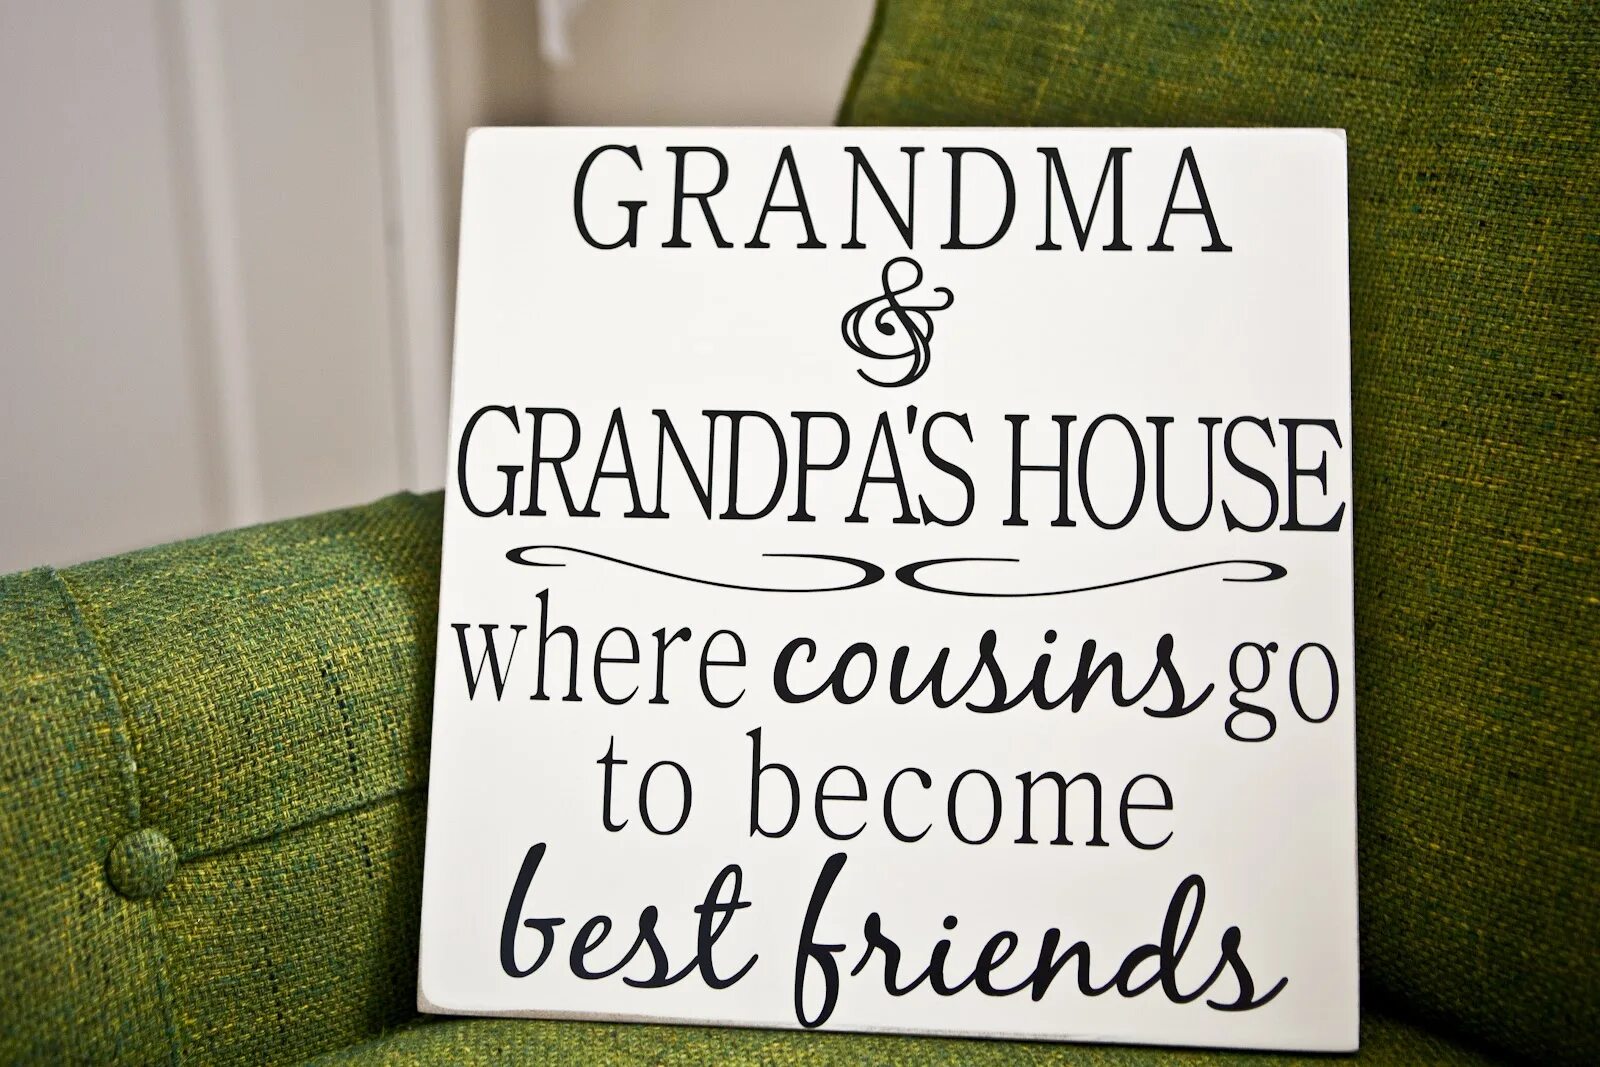 Quotes about grandma. Grandparents House. Grandparents quotes. Grandparent House quotes.